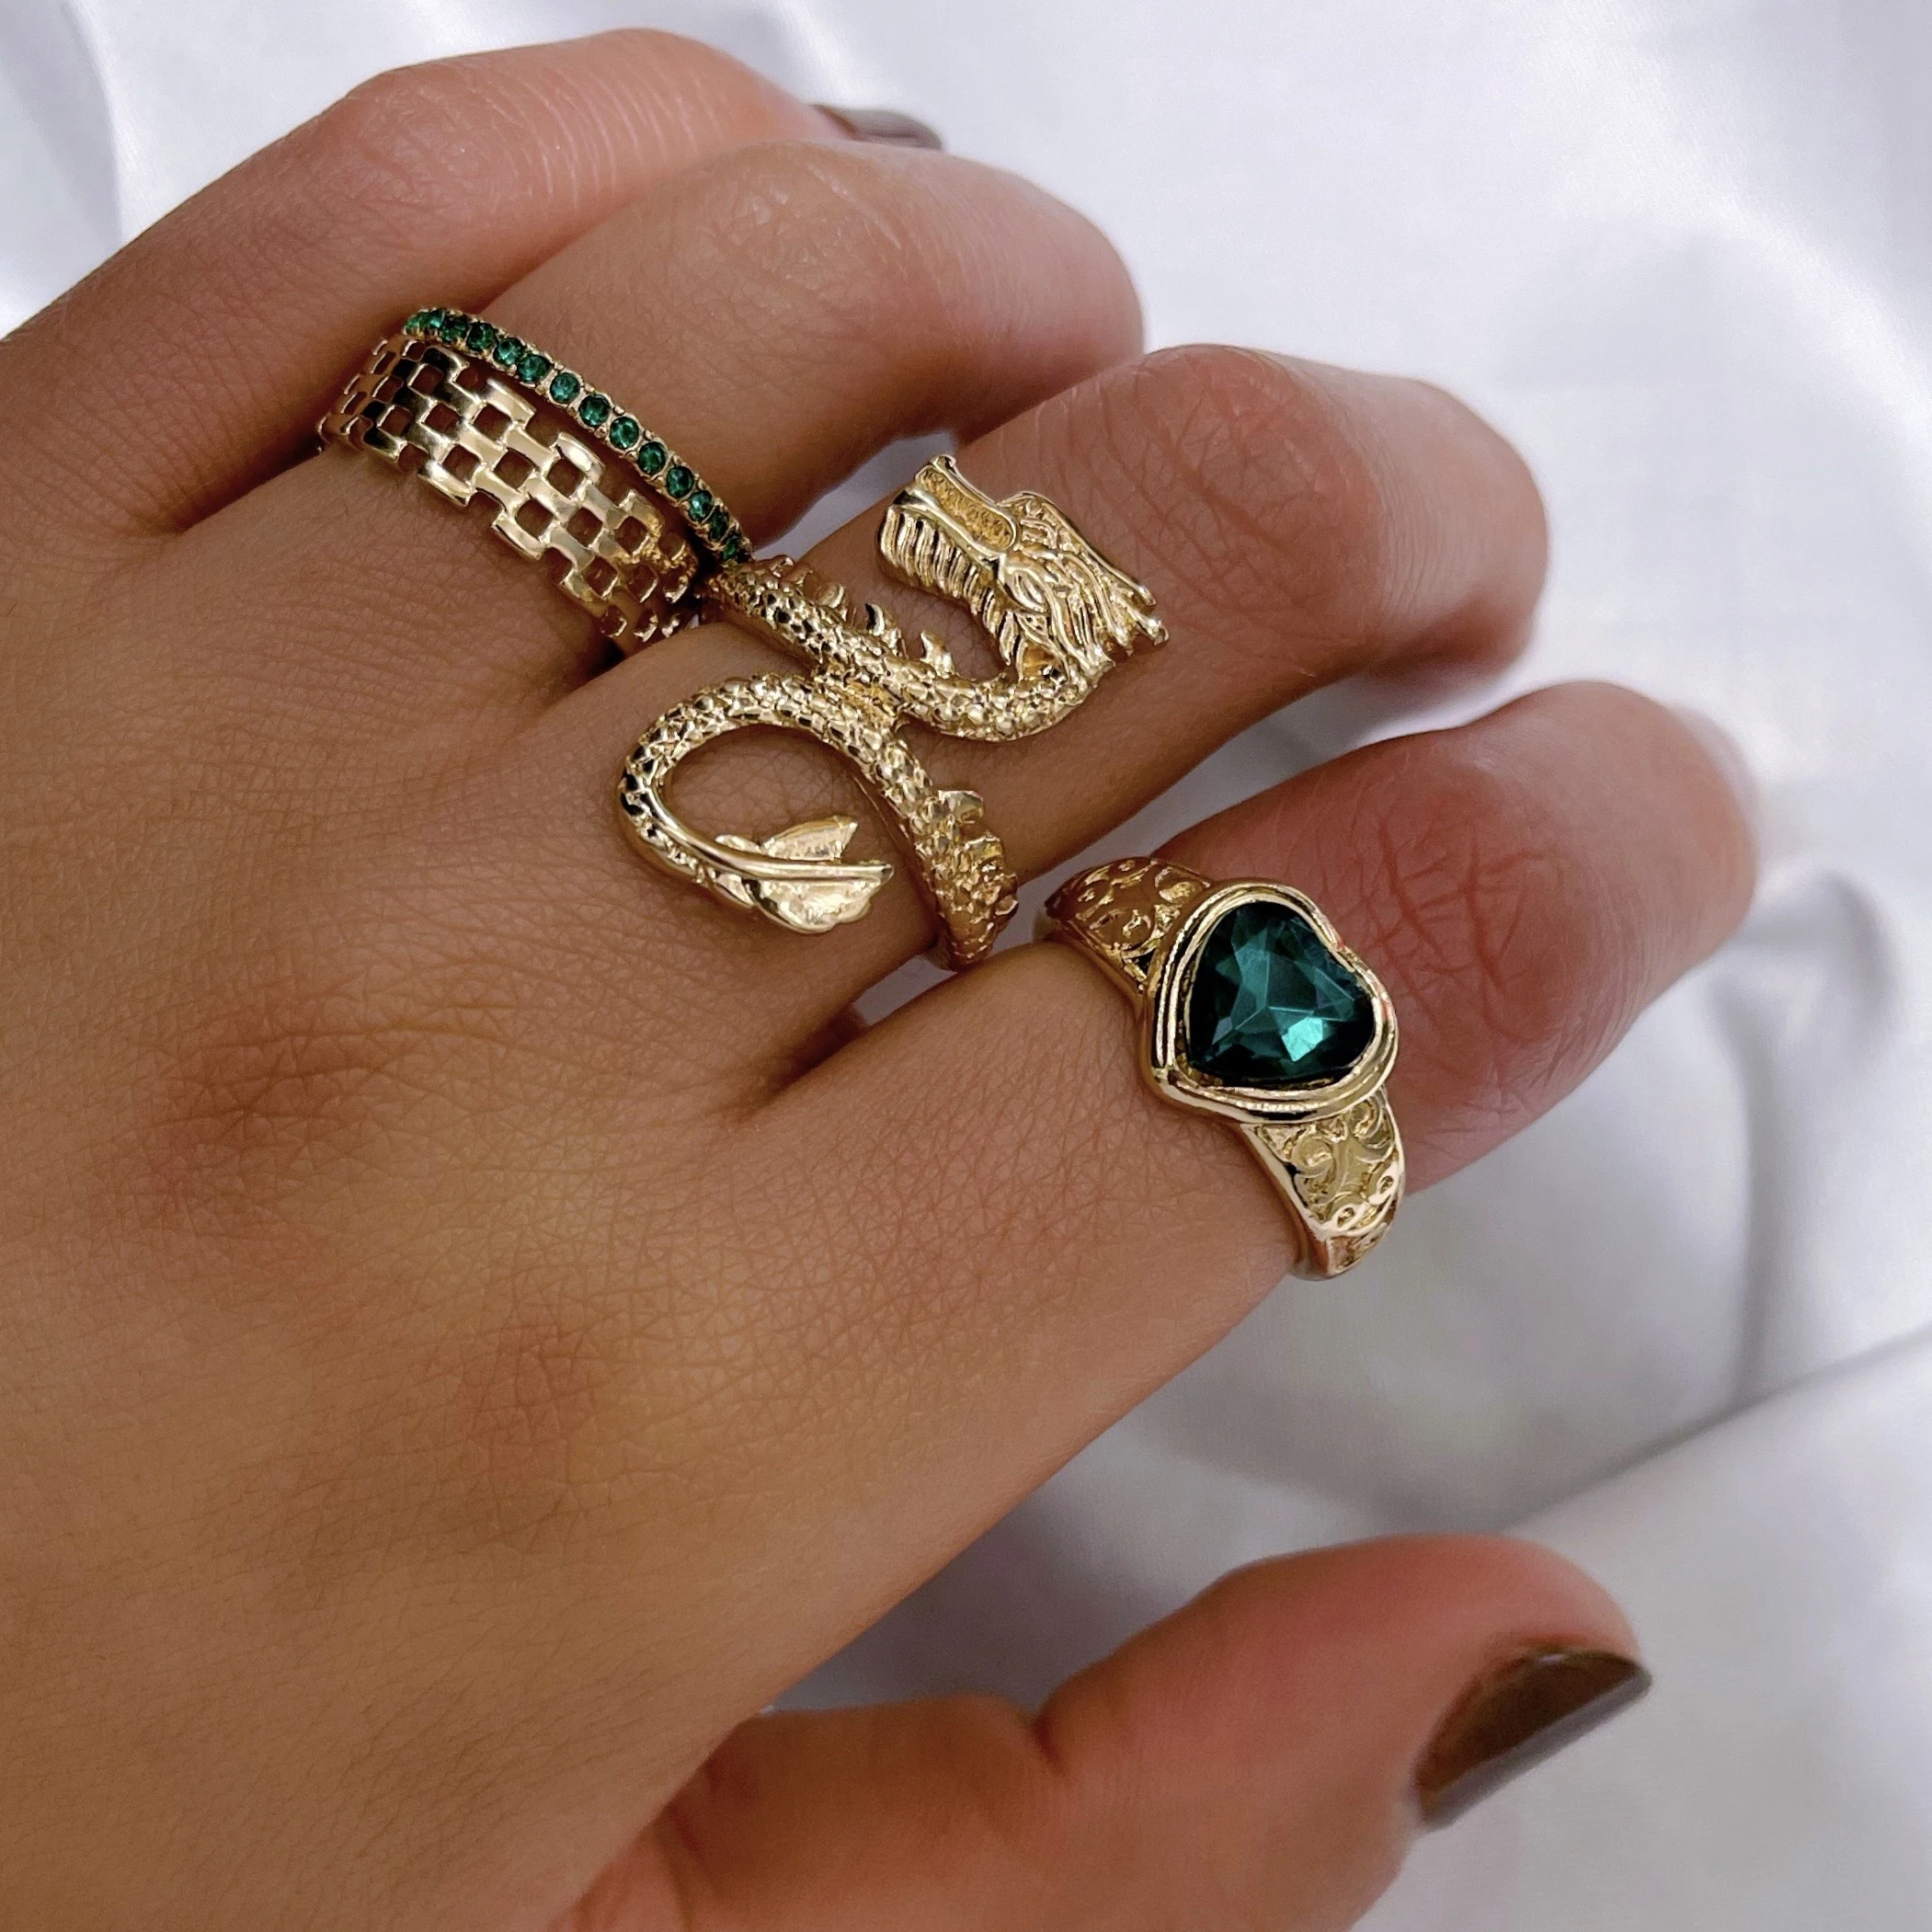 

Vintage Fashion Gothic Punk Ancient Dragon Rings Set Hip Hop Jewelry Opening Ring Thai Gold Boyfriend Gift Party Steampunk Men